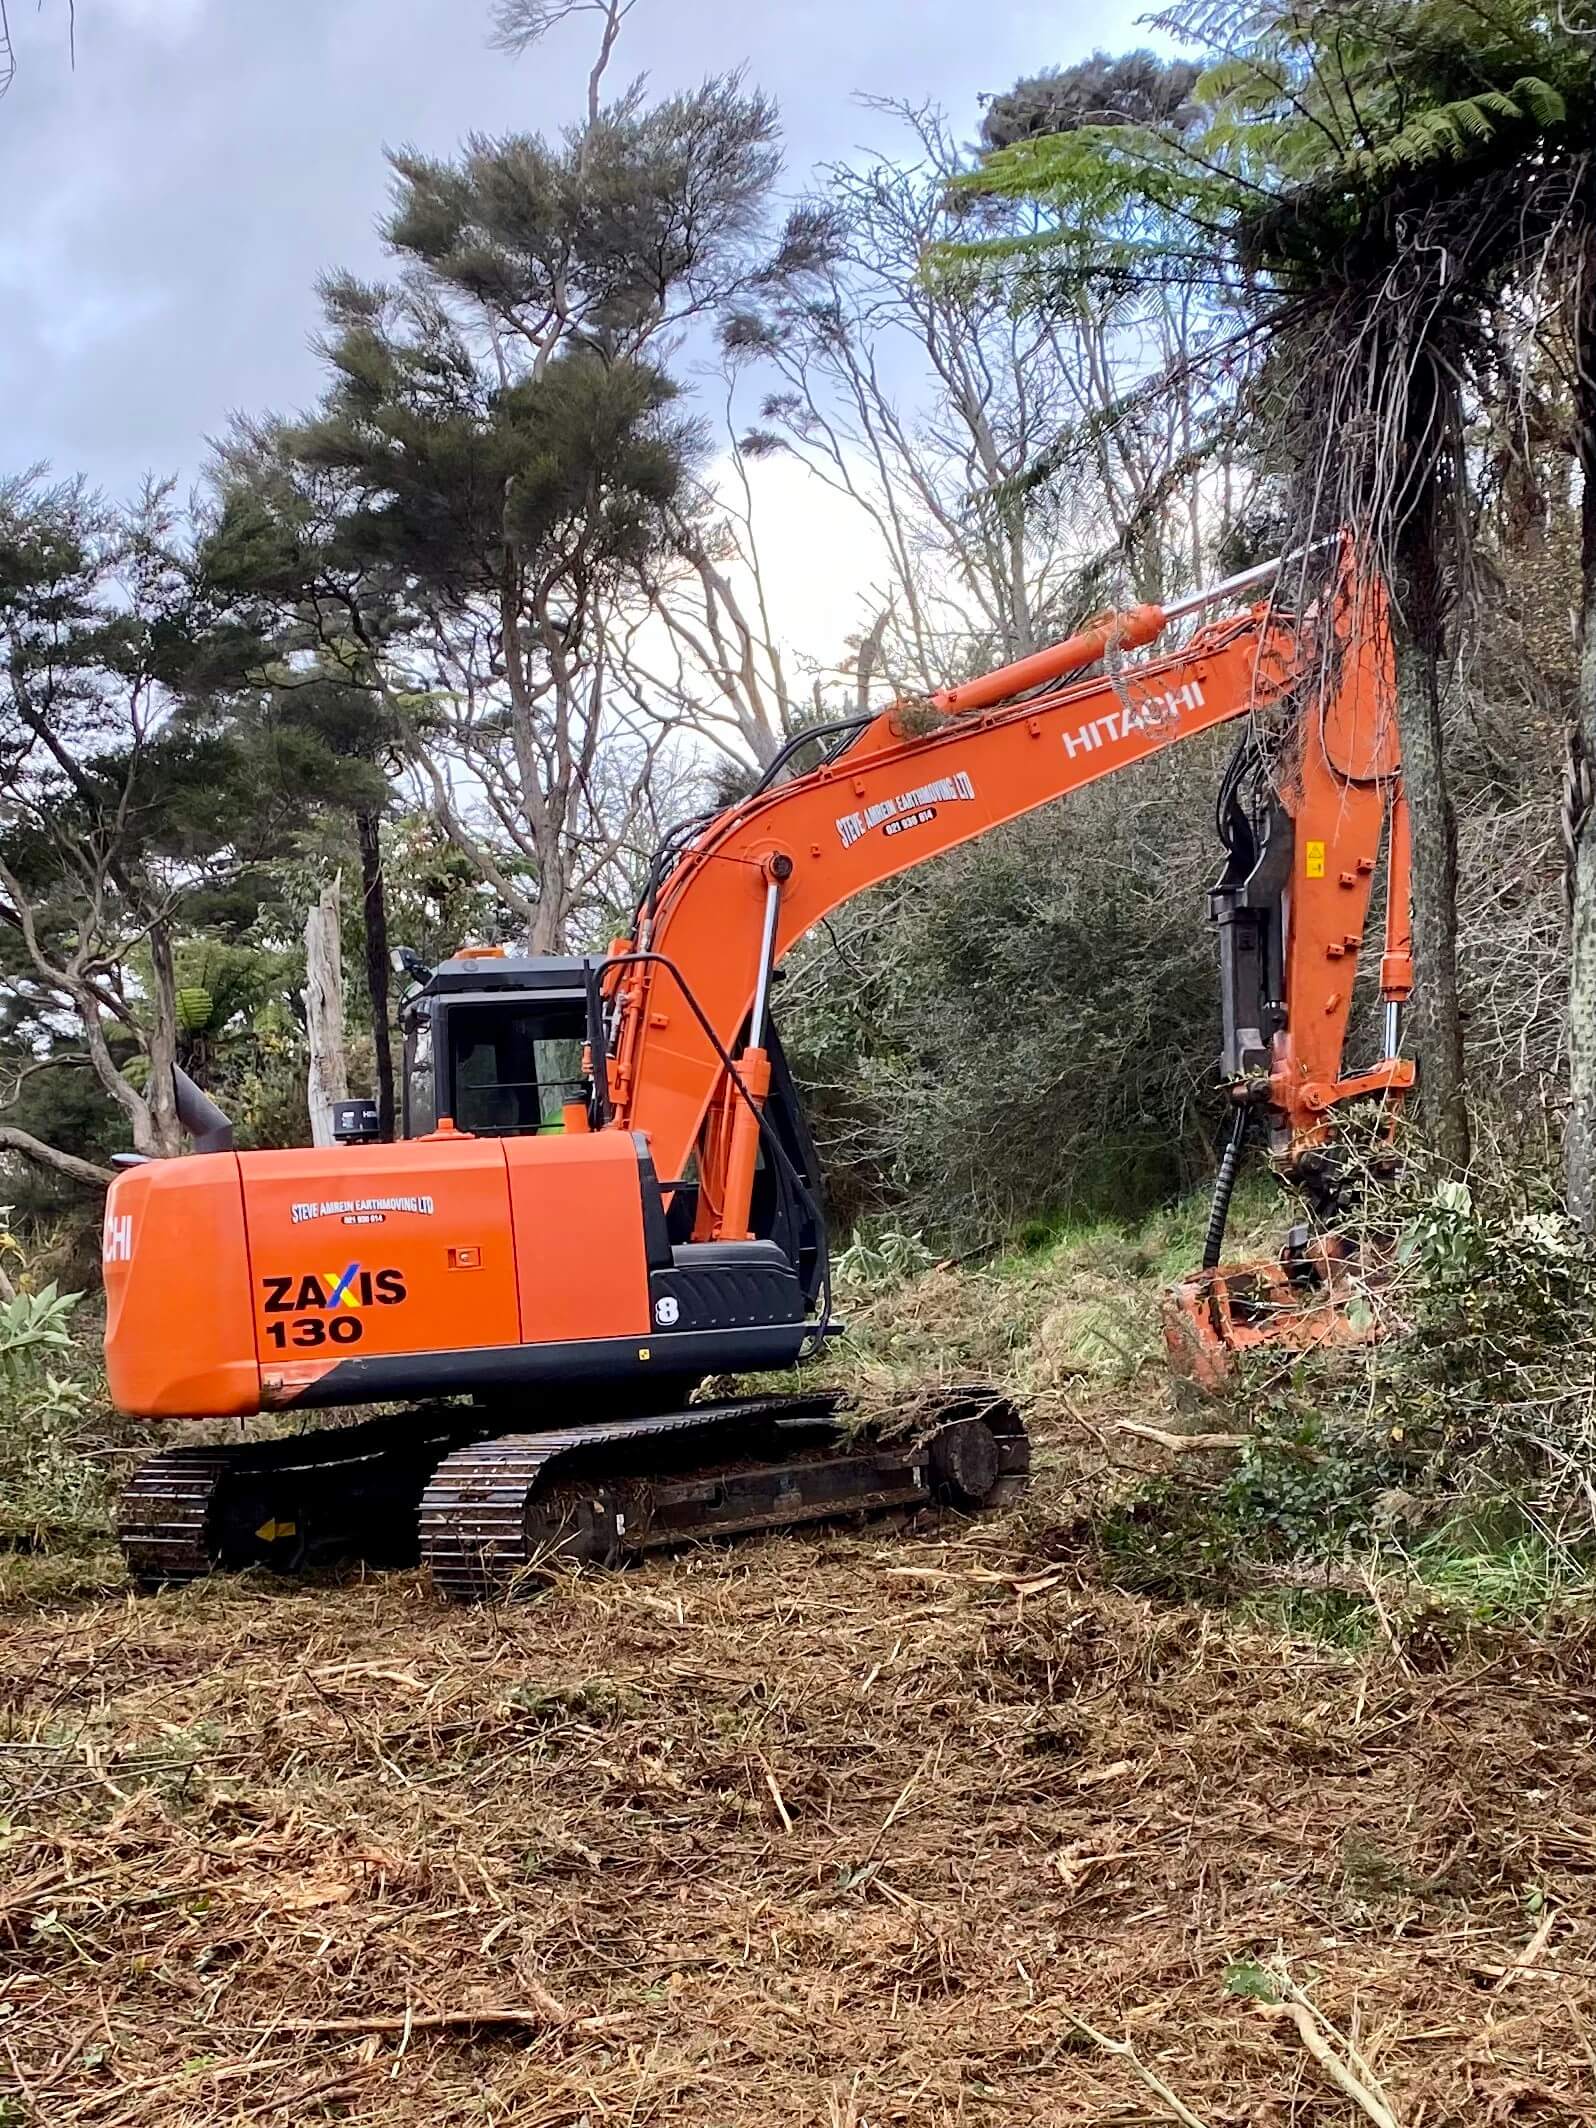 earthmoving, excavation, buldozers,c tractors, ground levellers available to hire in KatiKati